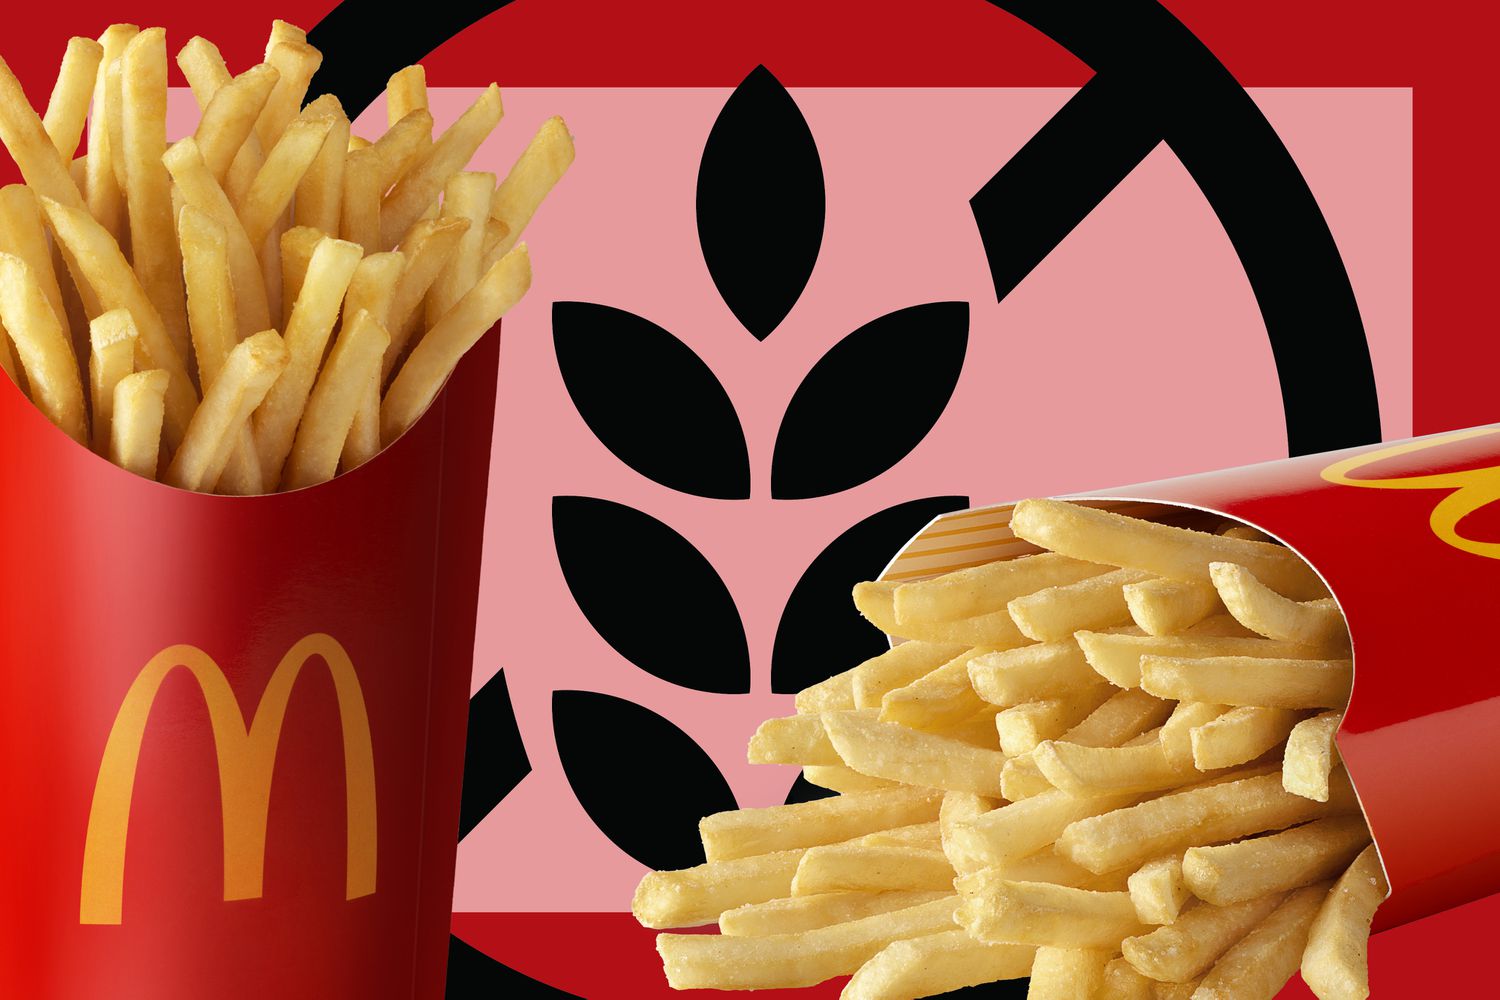 McDonalds French Fries Arent Gluten-Free. Heres Why [Video]